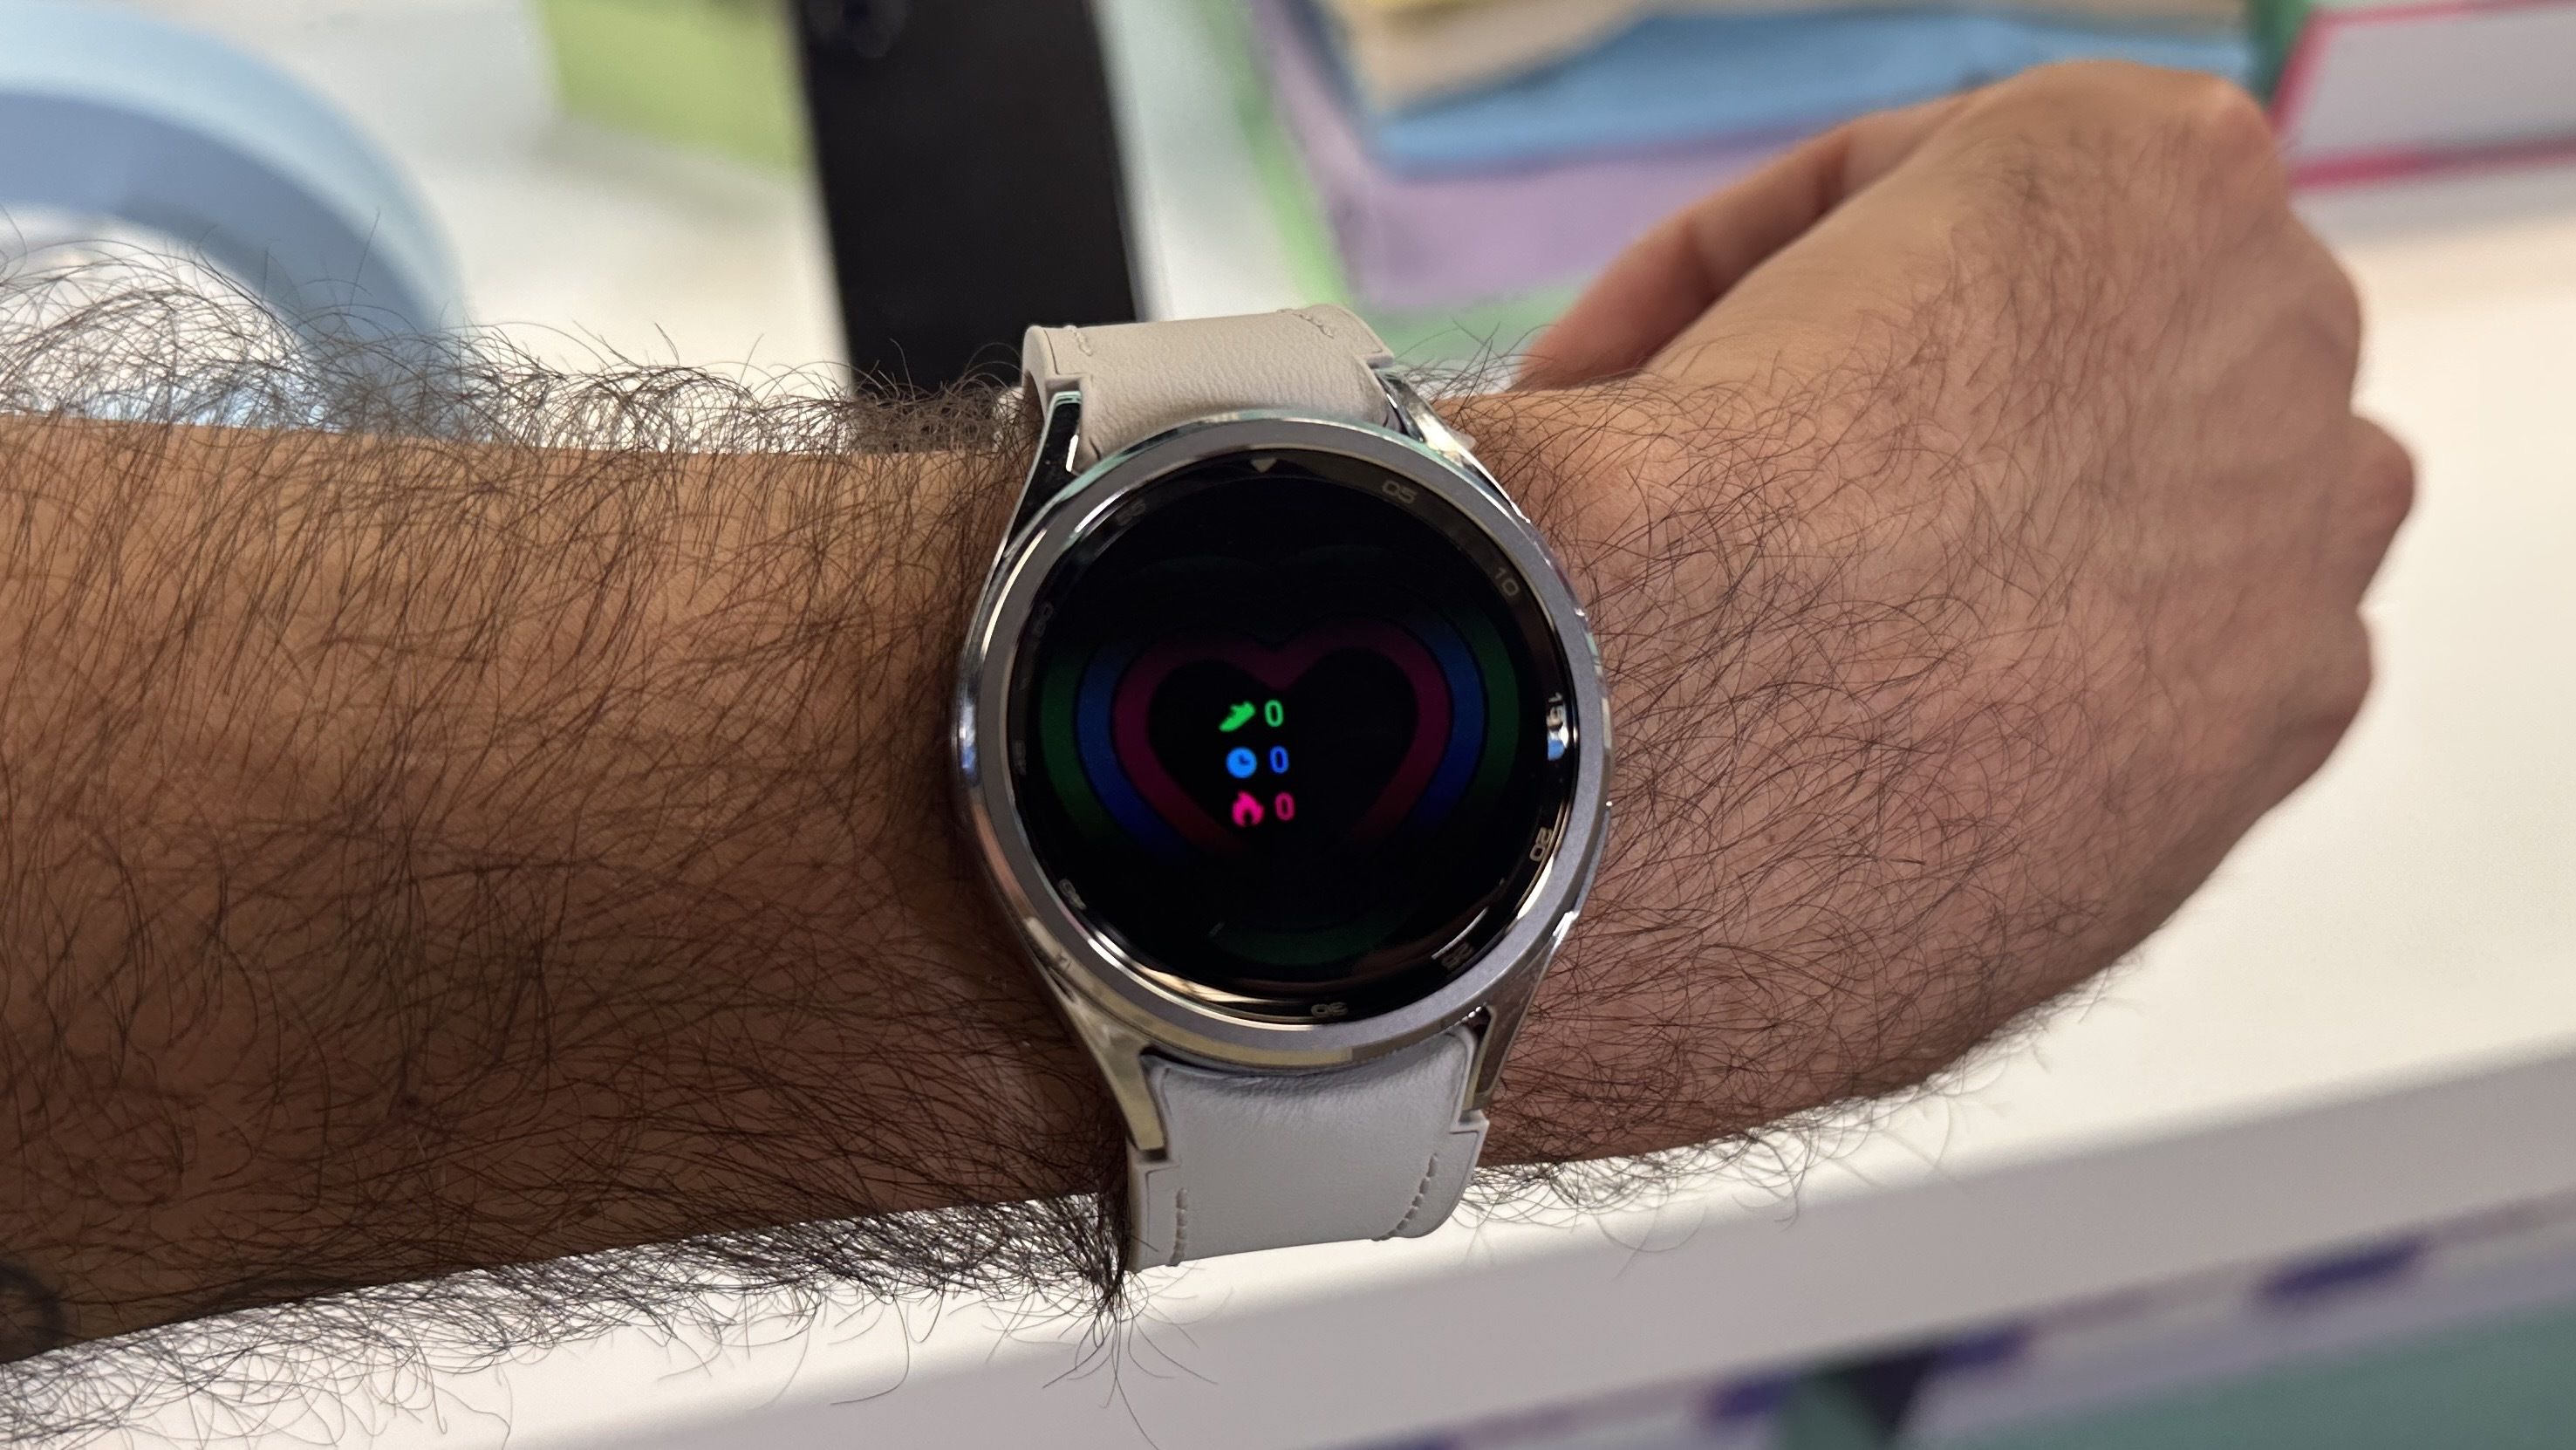 Samsung's Galaxy Watch 4 could be a peek at the future of Android